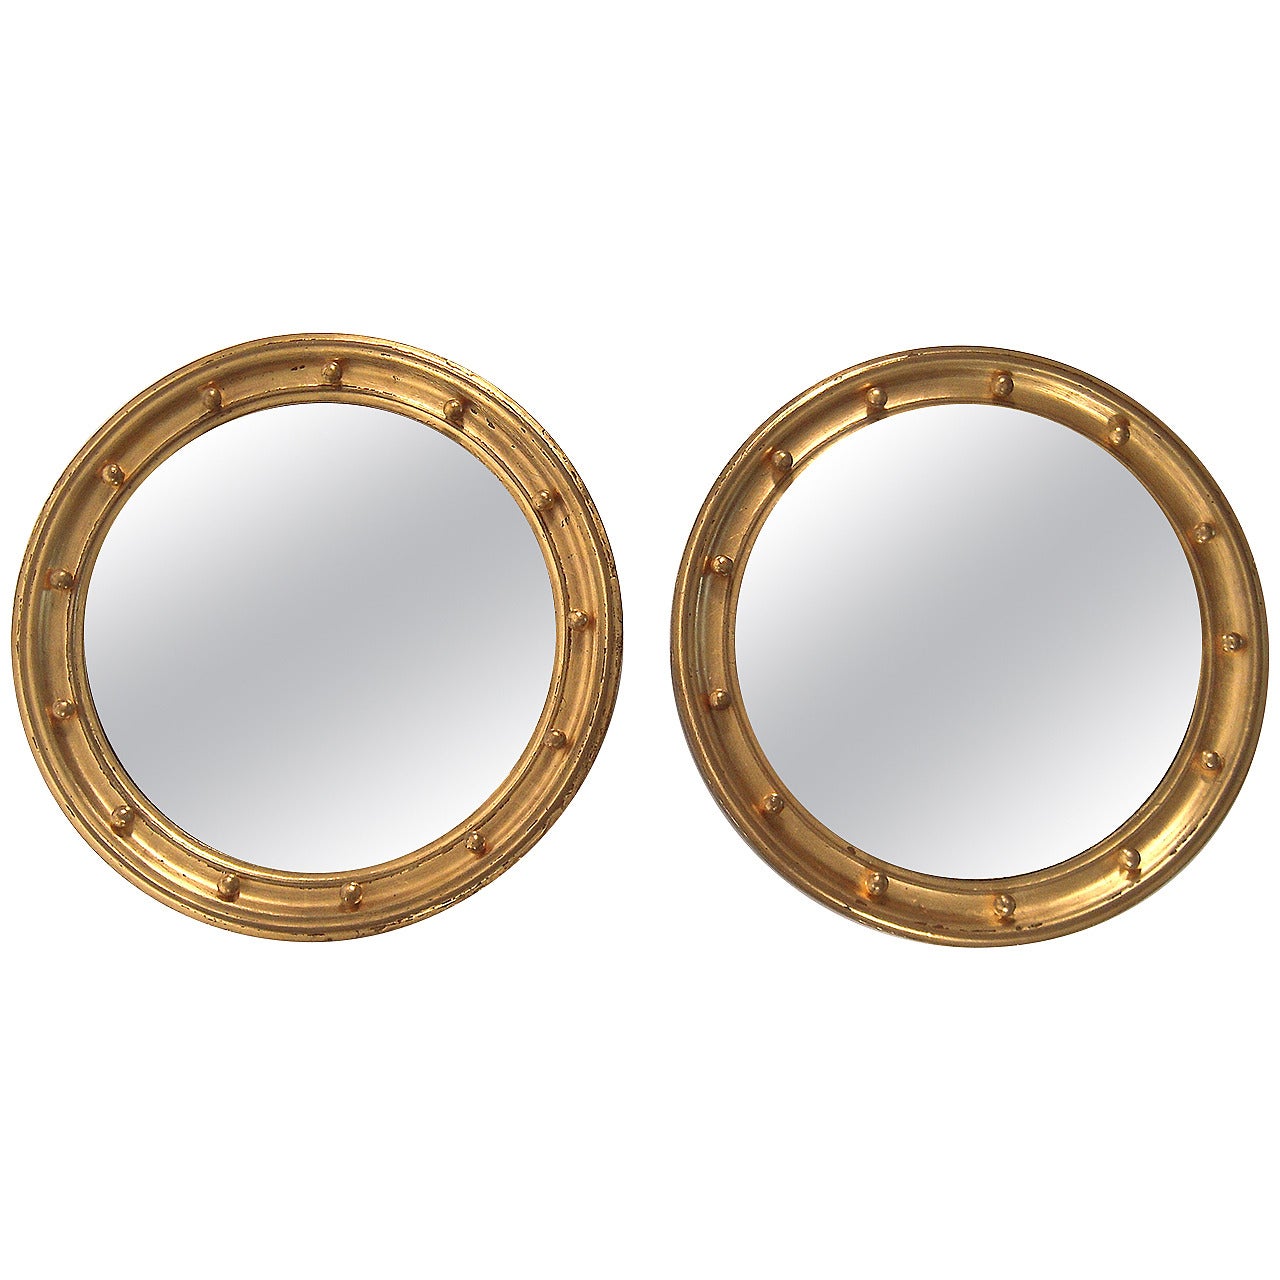 Matched Pair of Regency Style Gitwood Convex Mirrors